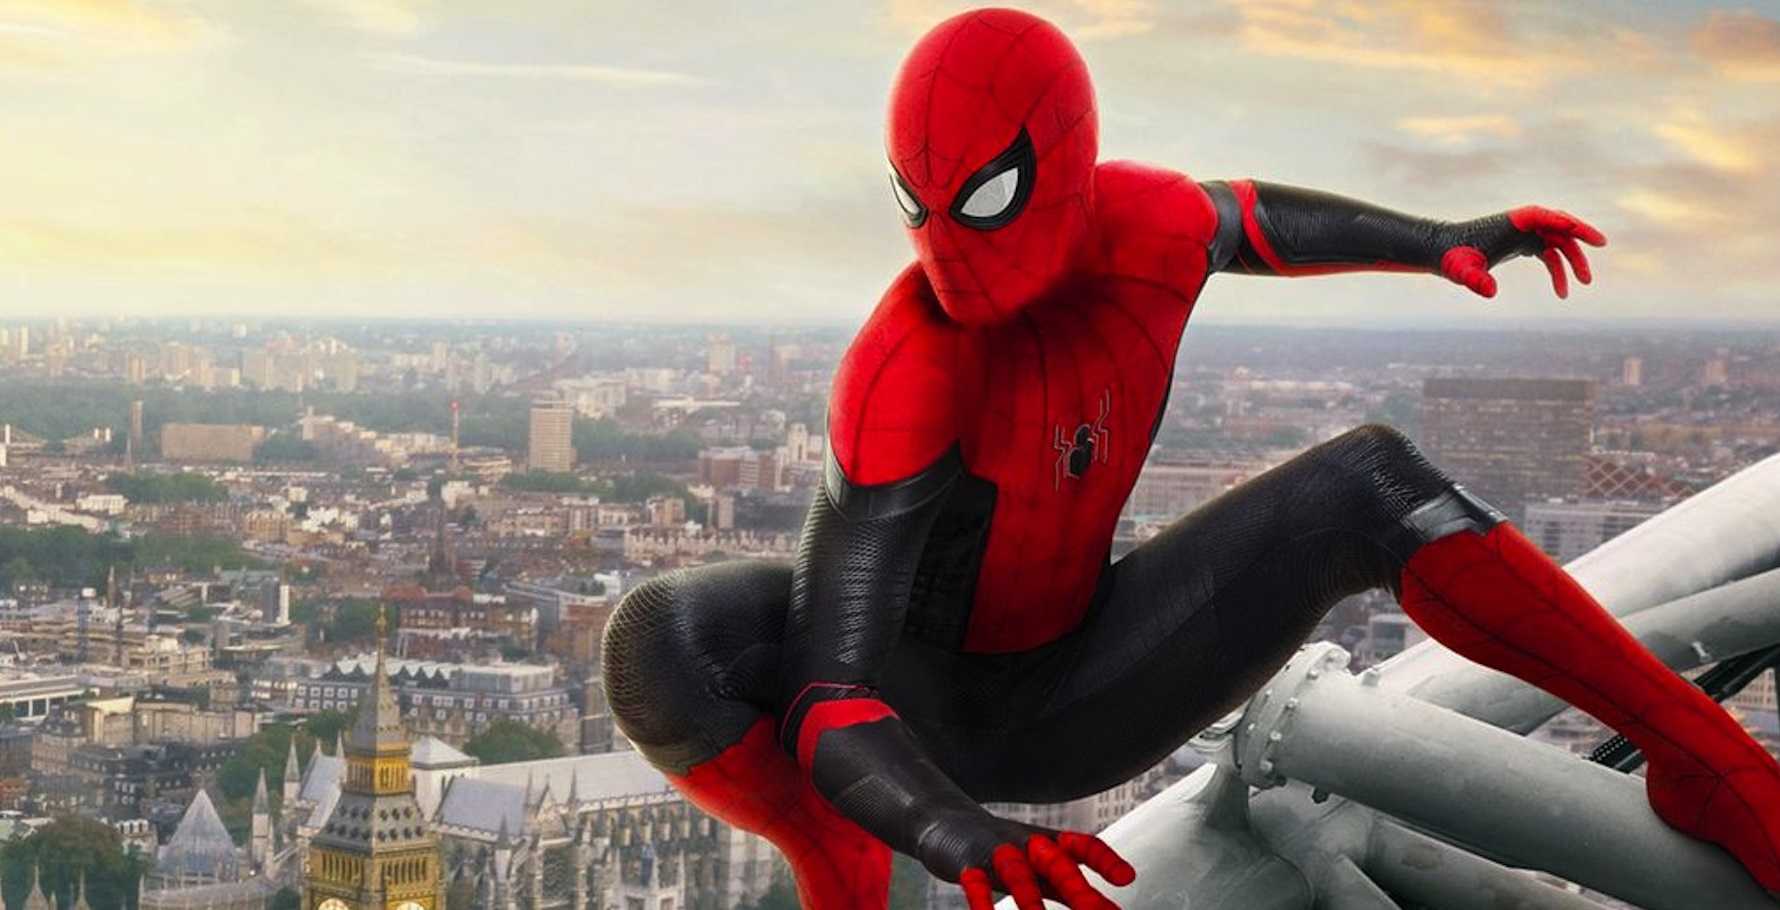 SpiderMan Far From Home Tamil Trailer Released After Humongous Success of Avengers Endgame